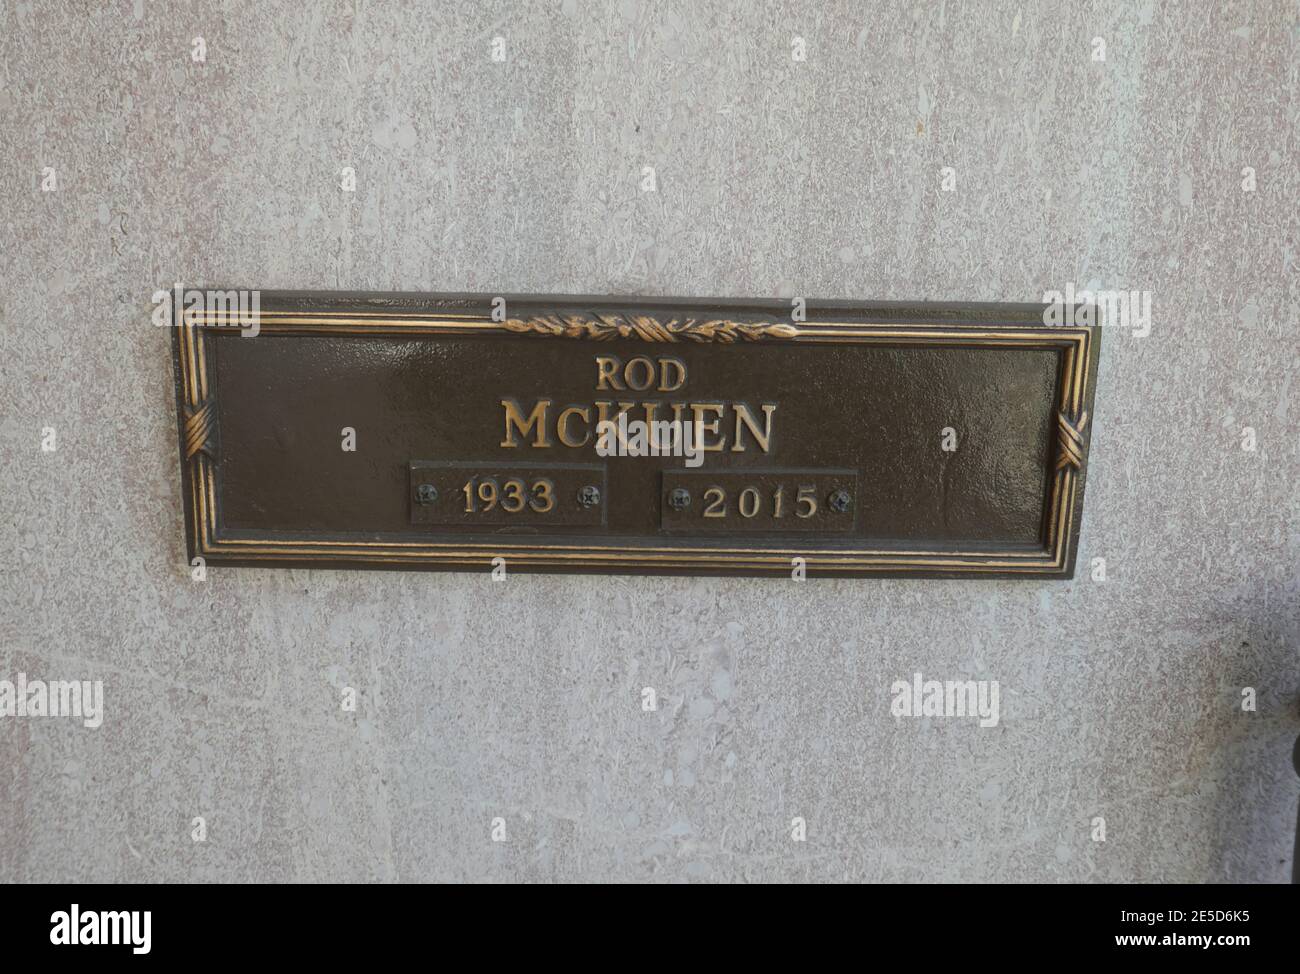 Los Angeles, California, USA 26th January 2021 A general view of atmosphere of poet/actor Rod McKuen's grave at Pierce Brothers Westwood Village Memorial Park on January 26, 2021 in Los Angeles, California, USA. Photo by Barry King/Alamy Stock Photo Stock Photo